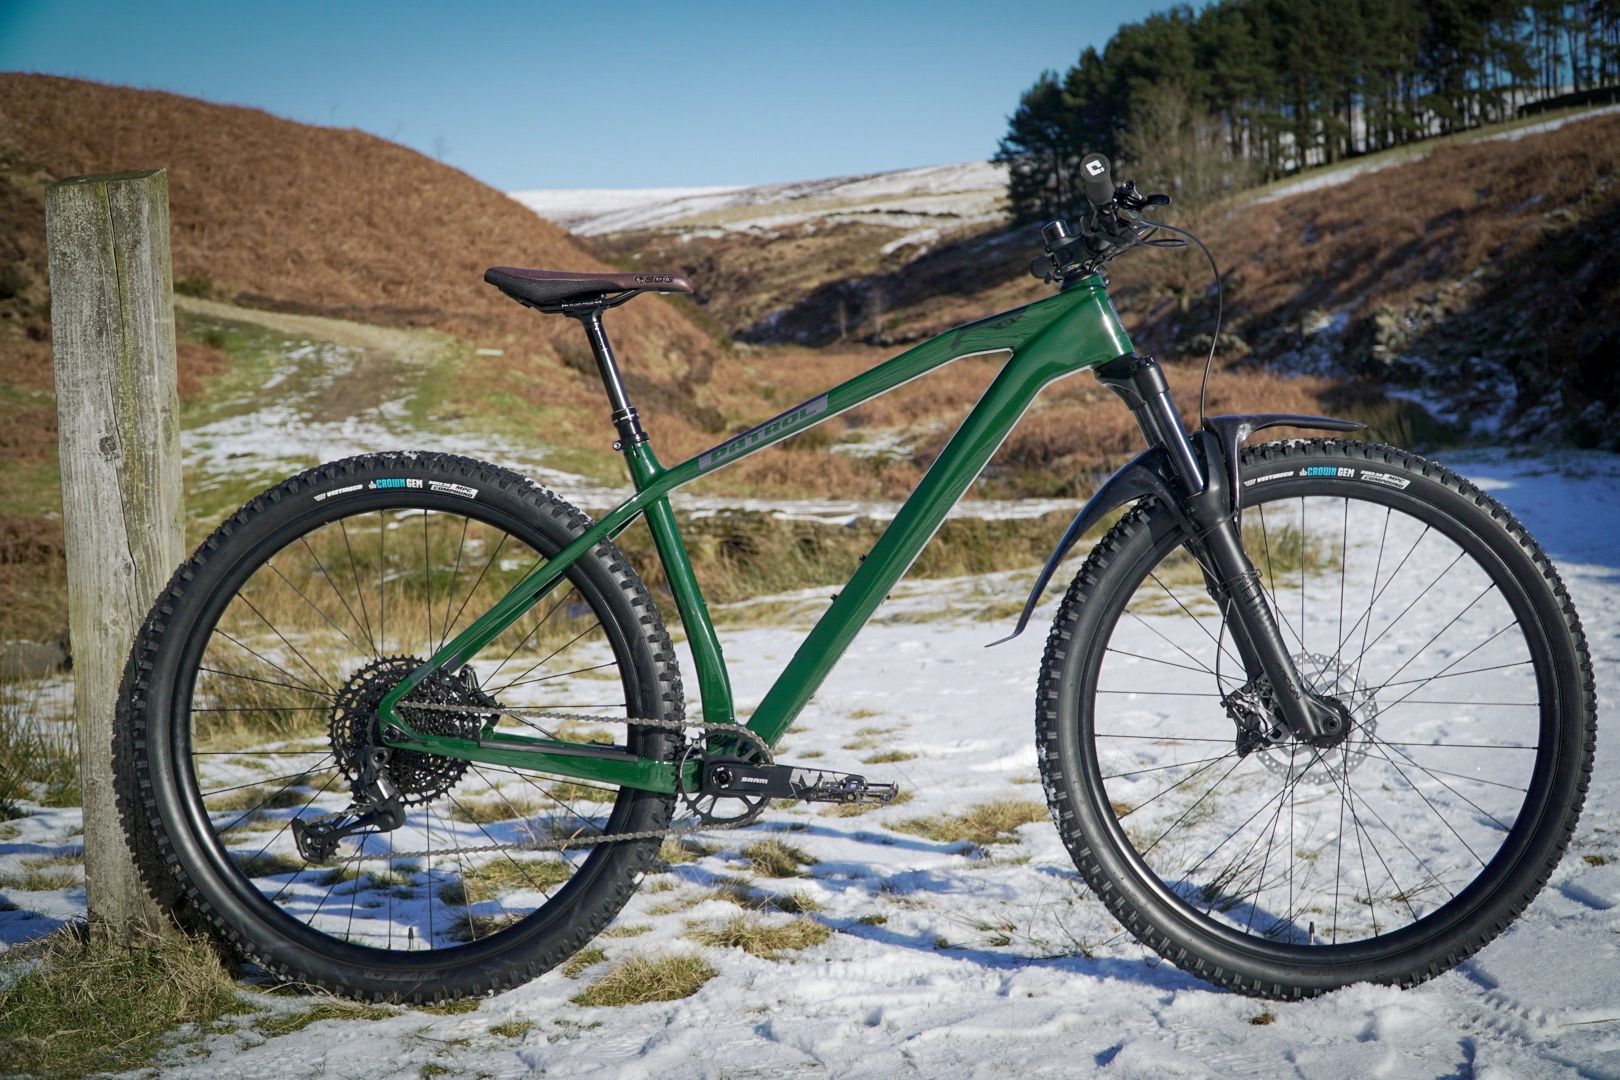 First Look: Patrol C091 Carbon Hardtail